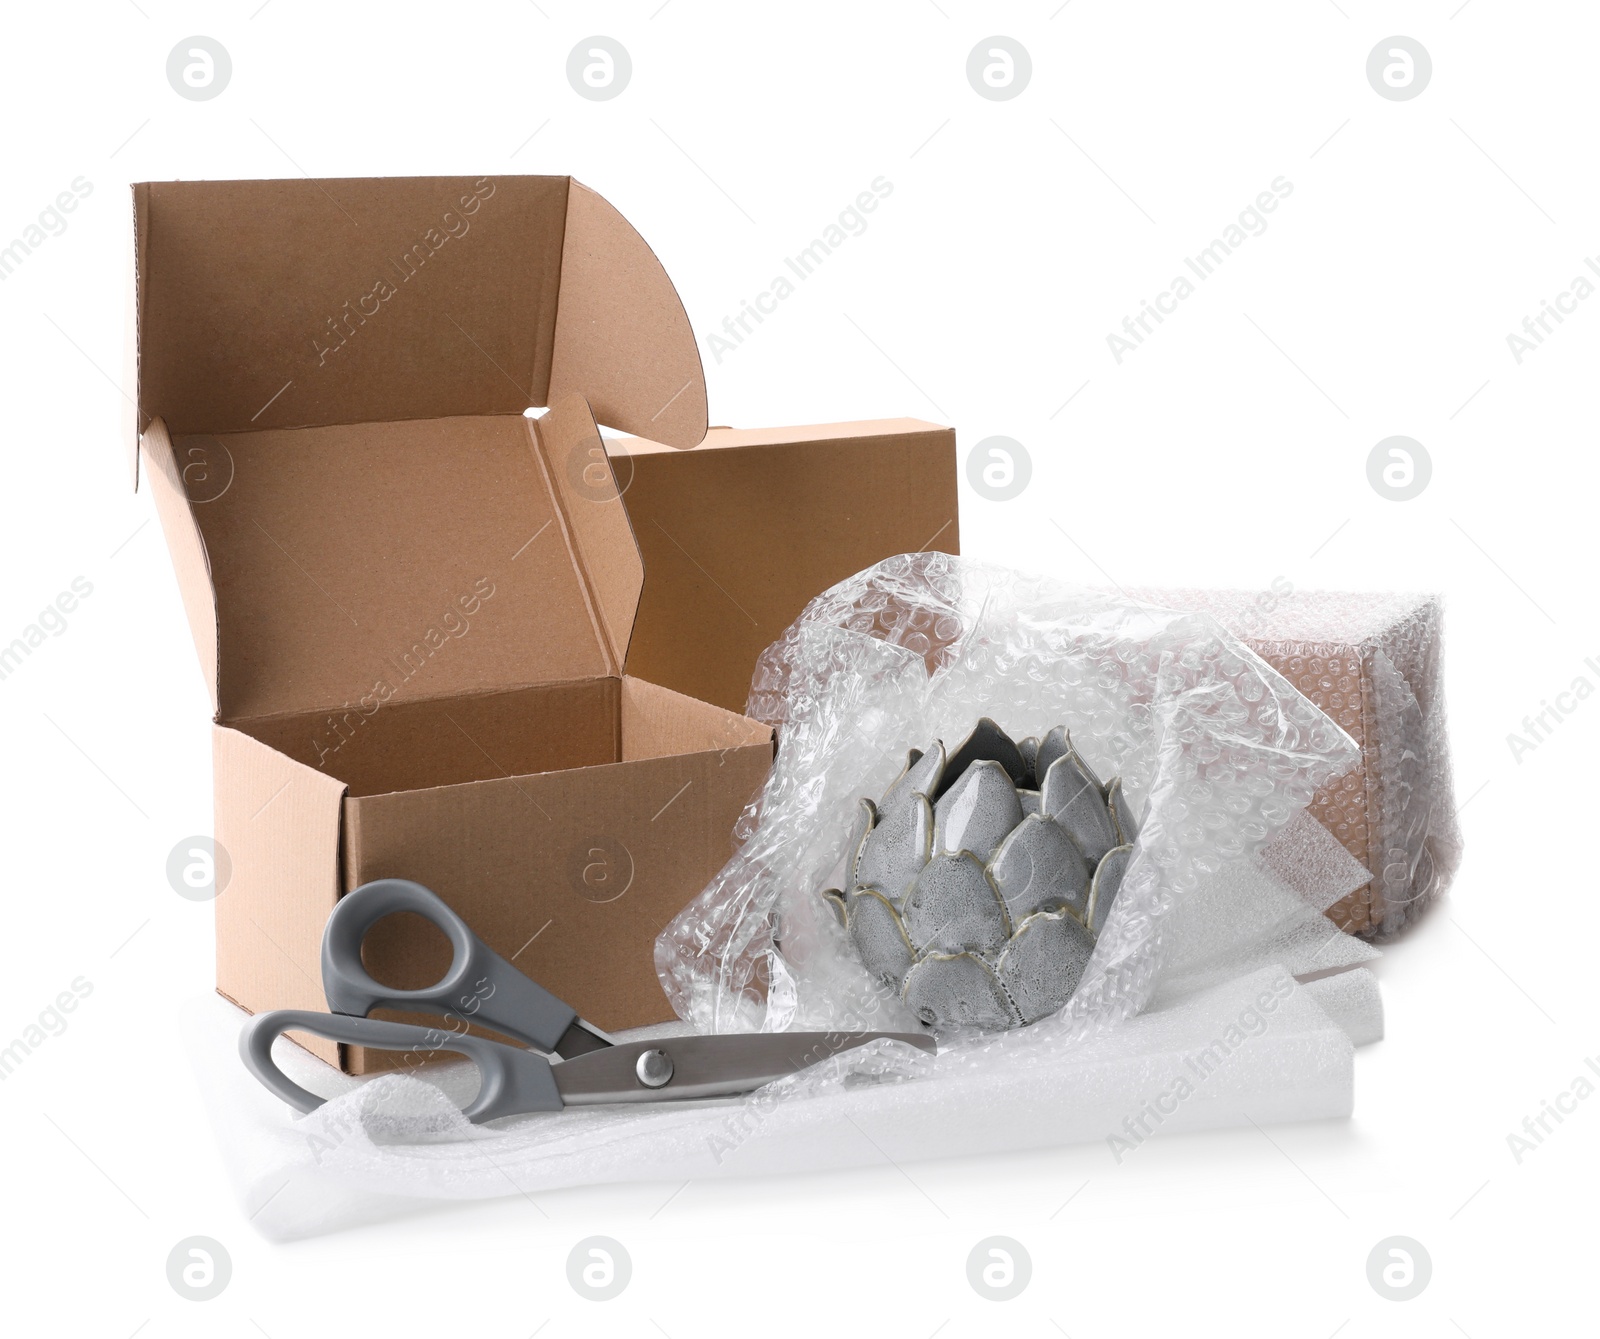 Photo of Cardboard boxes, bubble wrap, scissors and ceramic decor item on white background